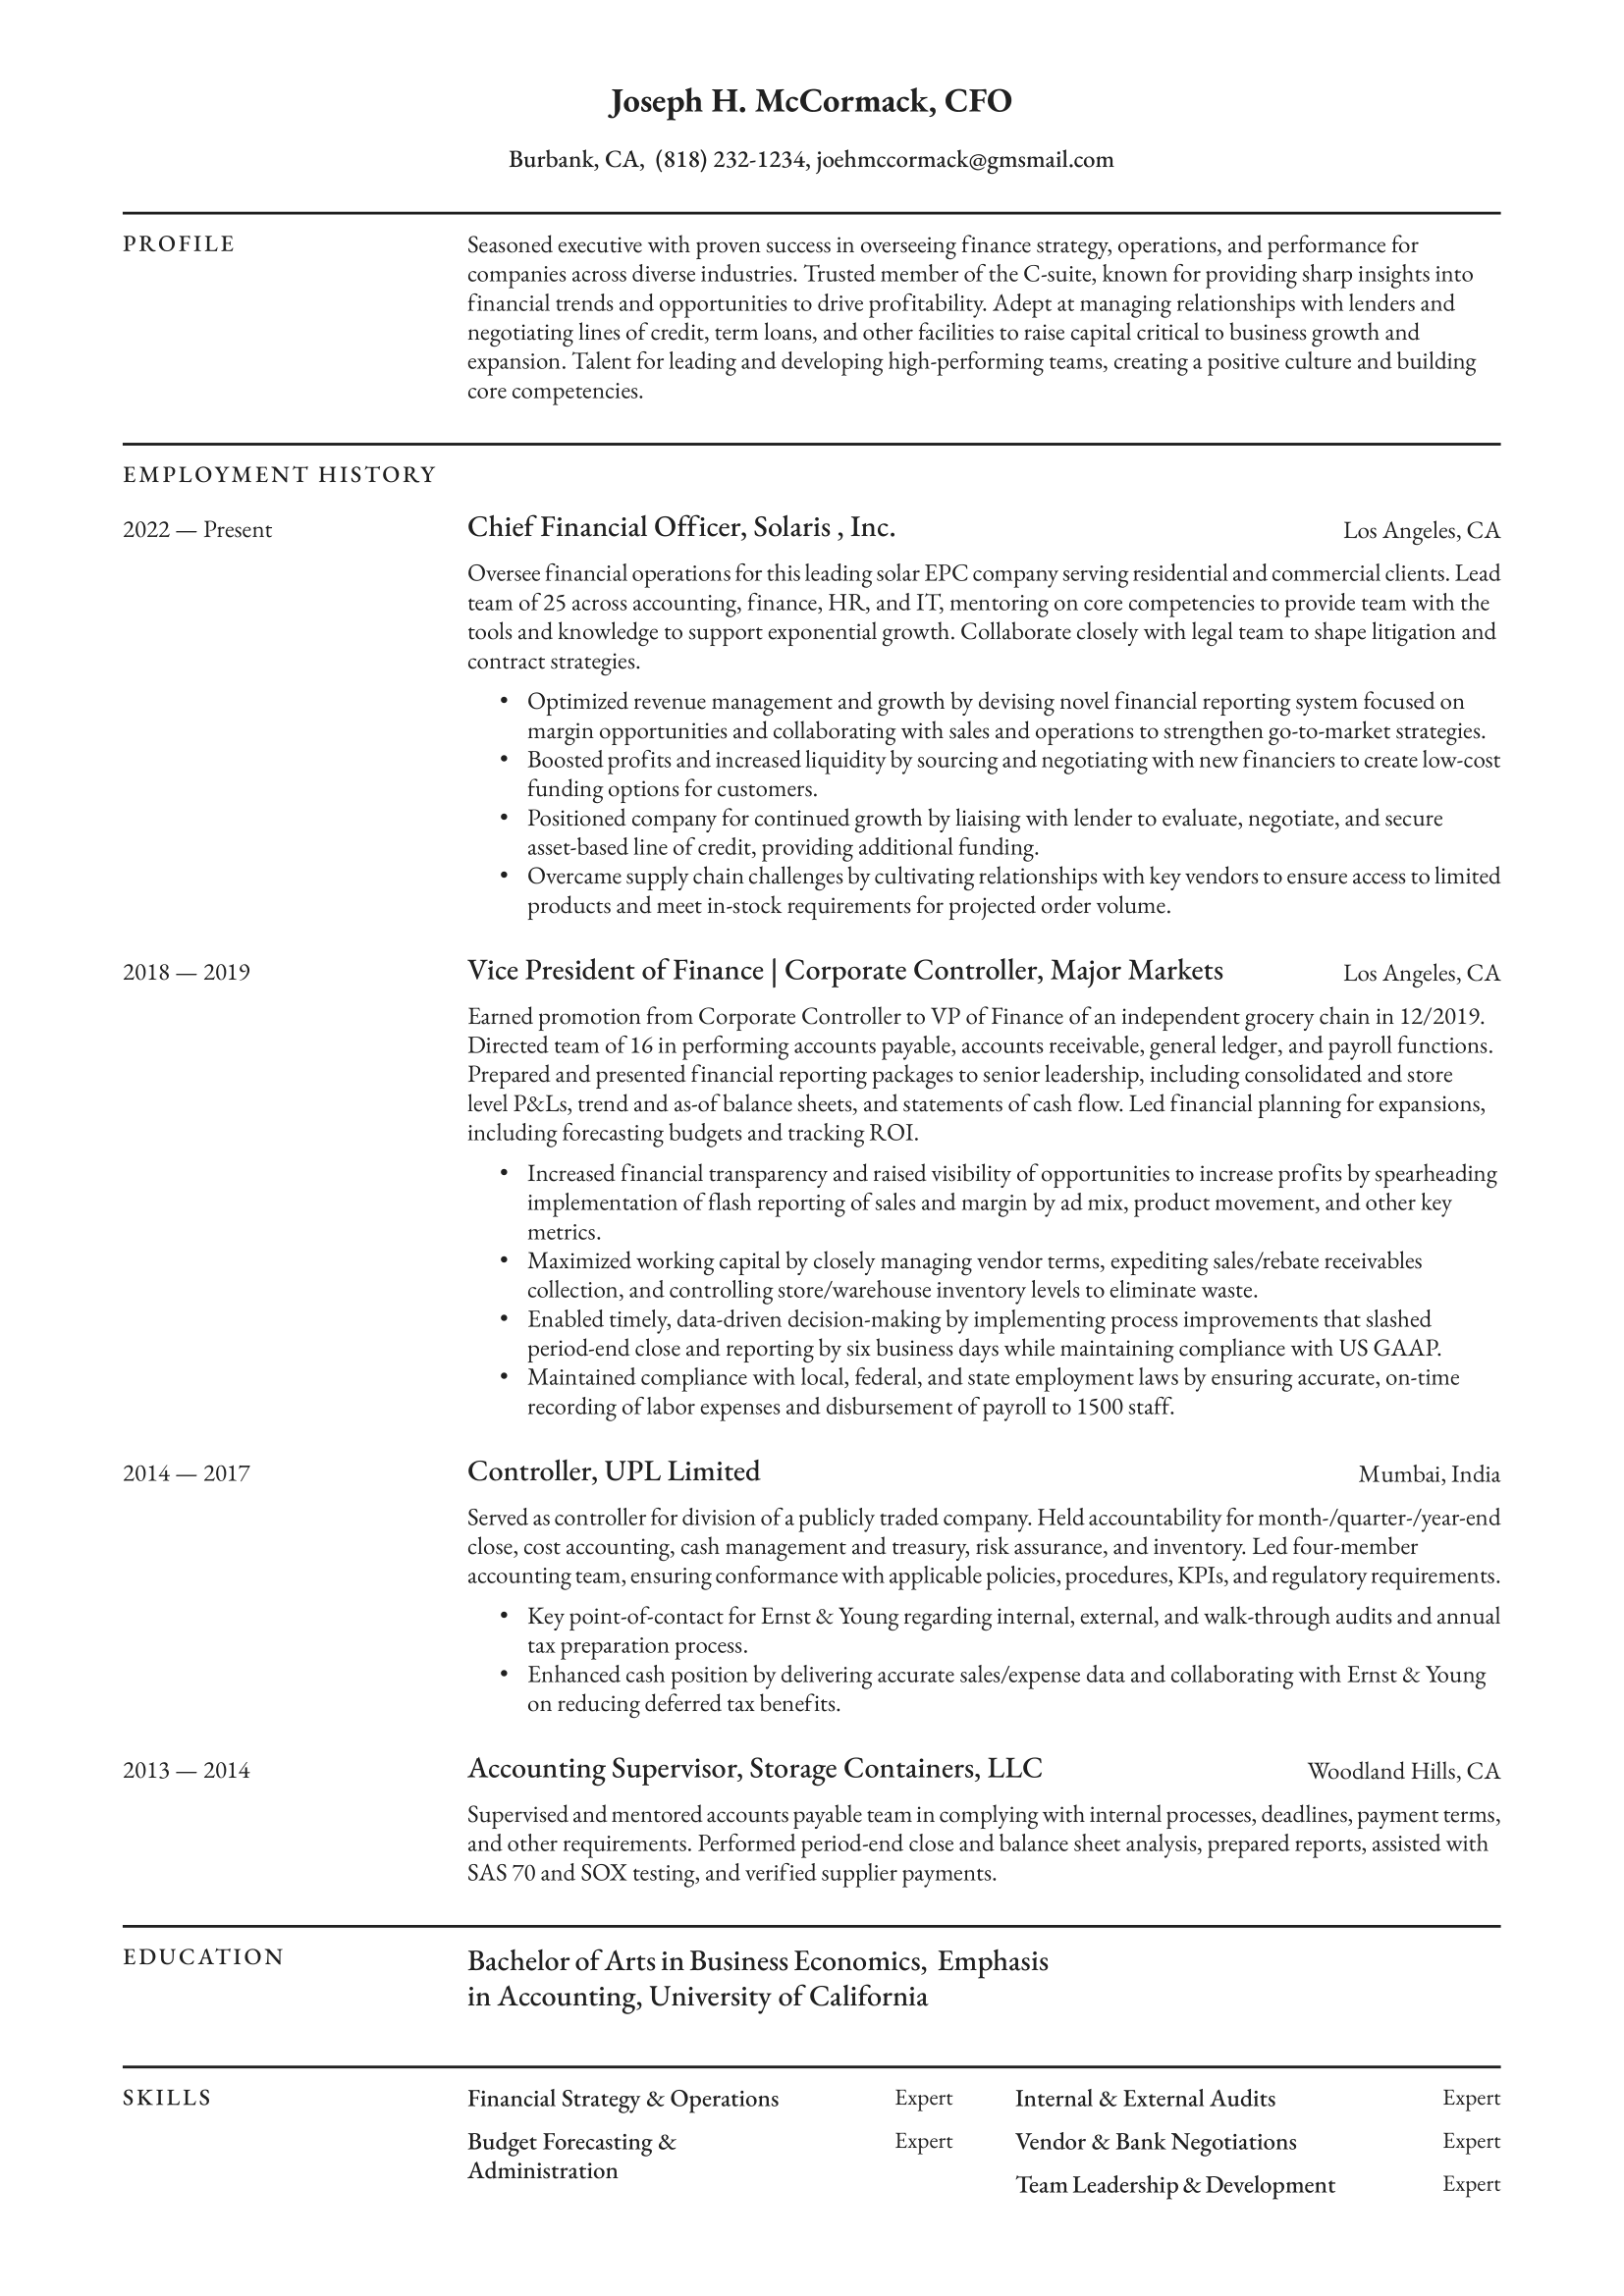 CFO-Resume-Example.png